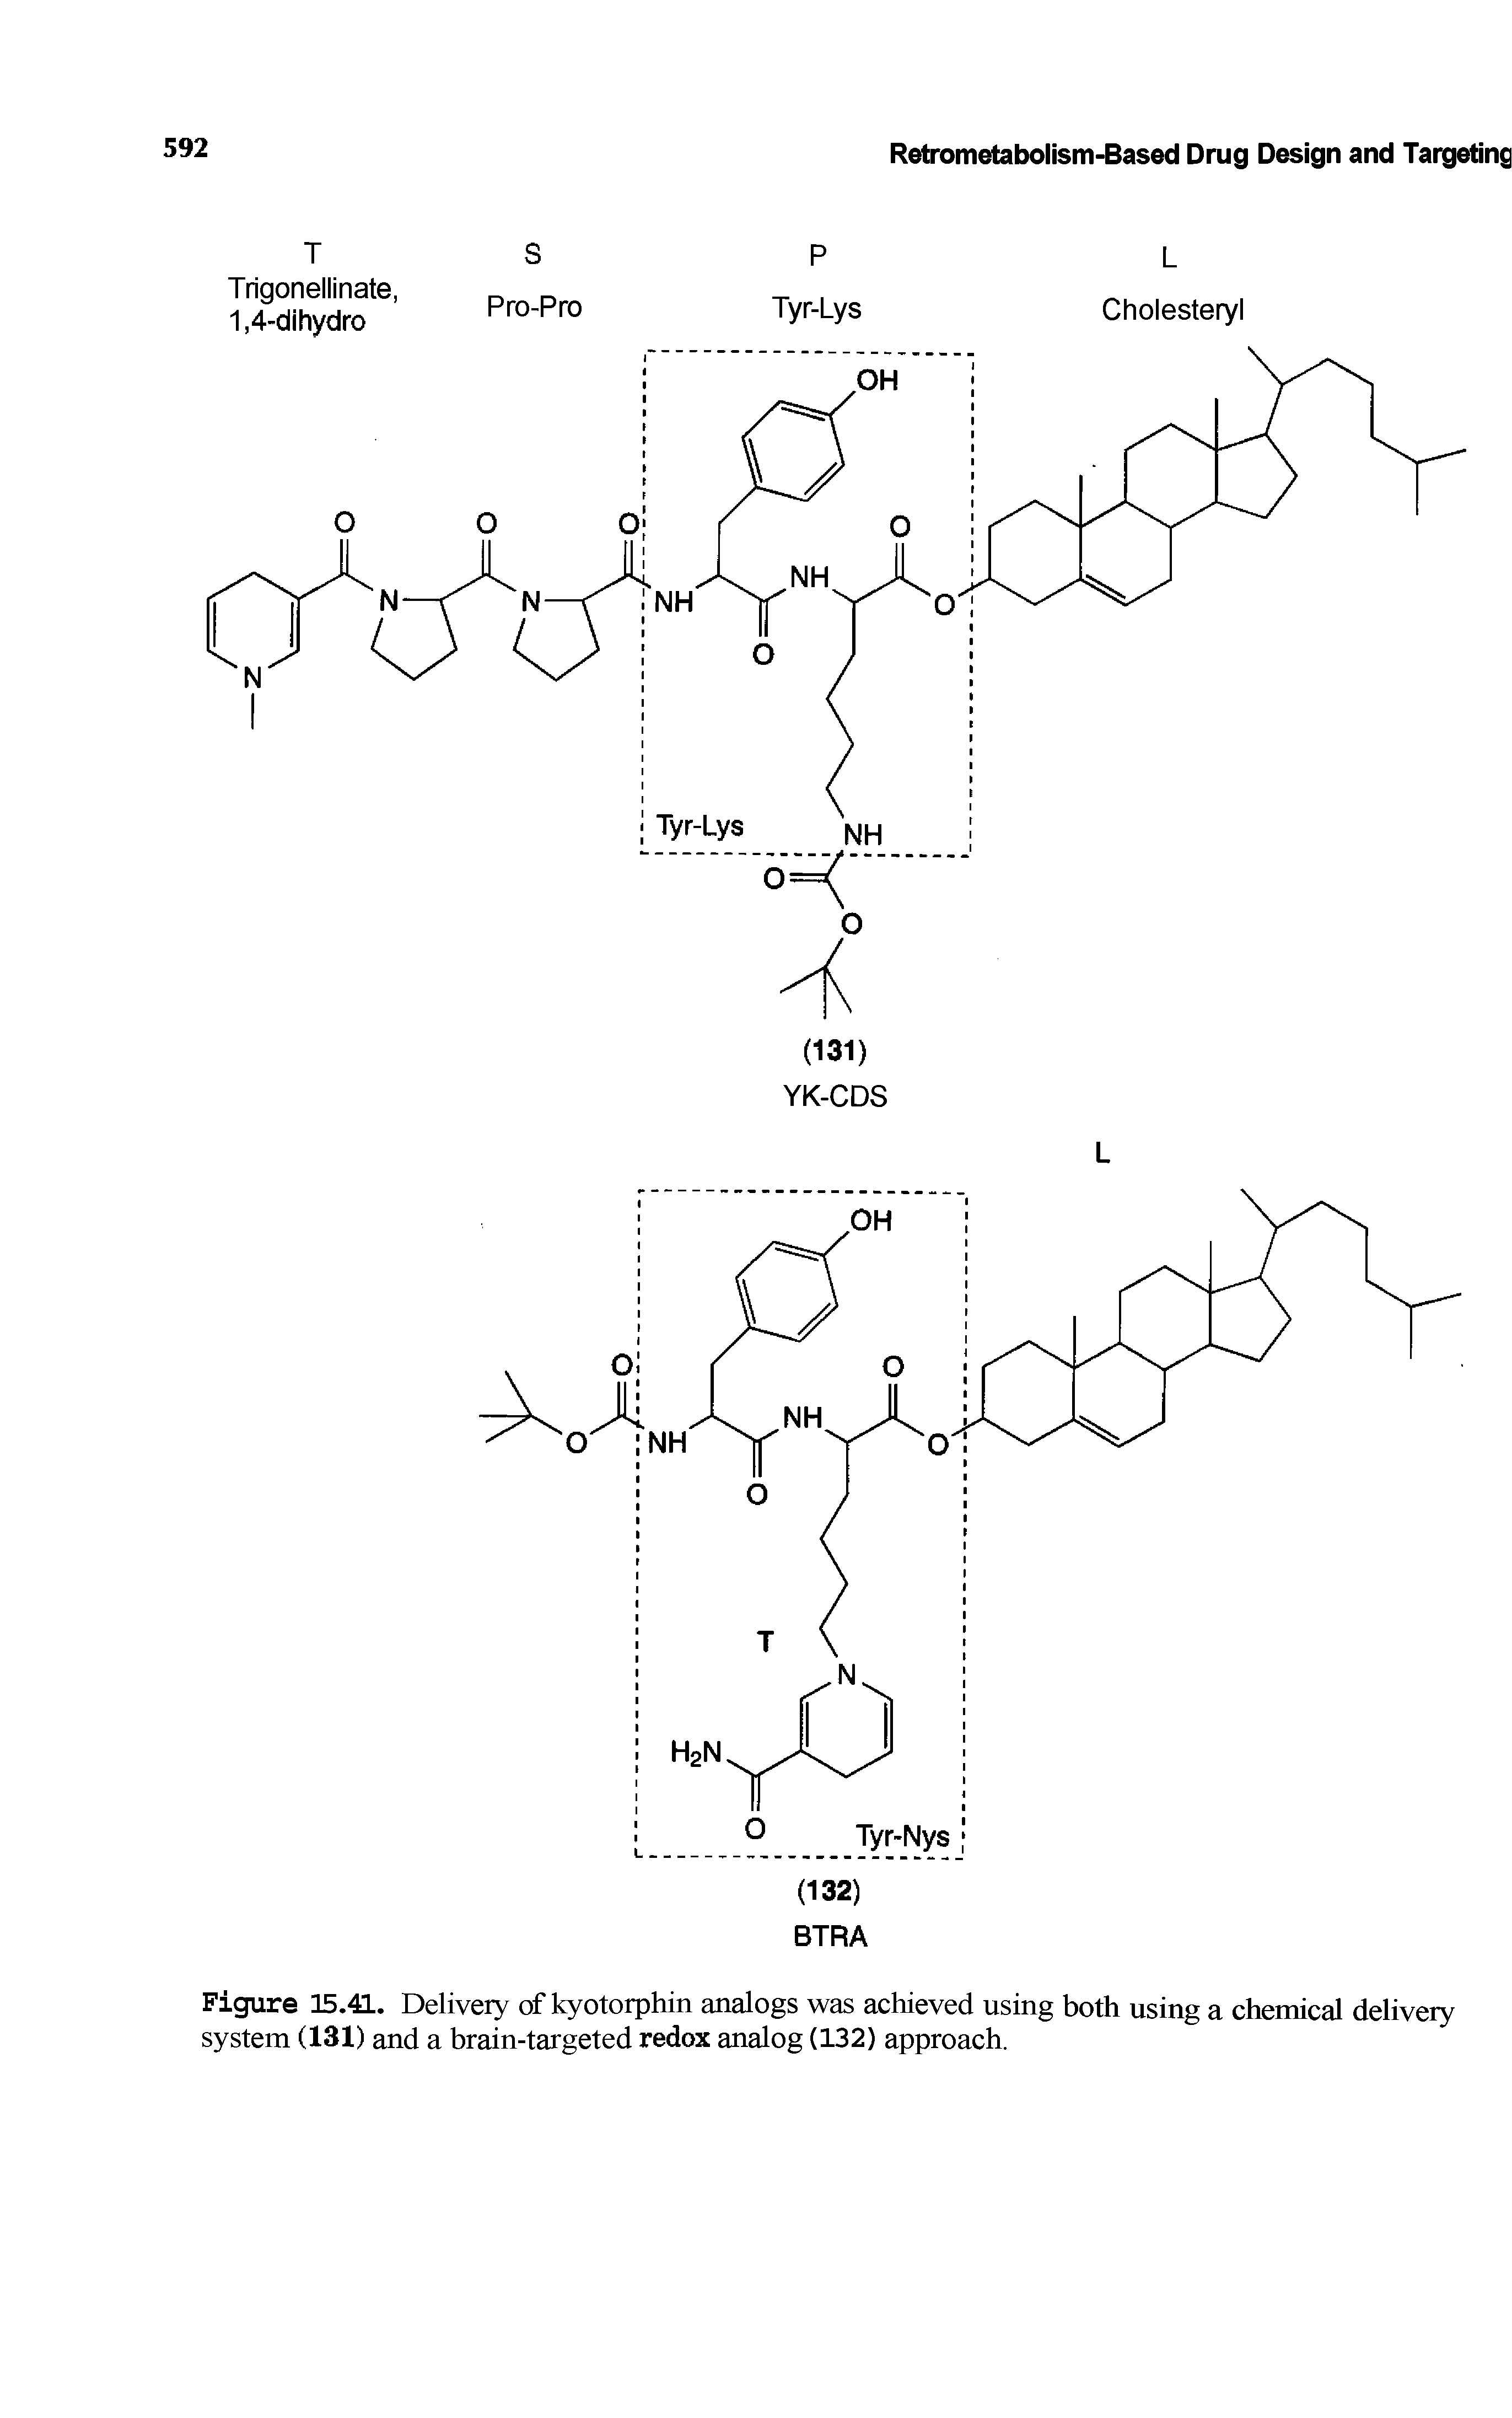 Figure 15.41. Deliveiy of kyotorphin analogs was achieved using both using a chemical delivery system (131) and a brain-targeted redox analog (132) approach.